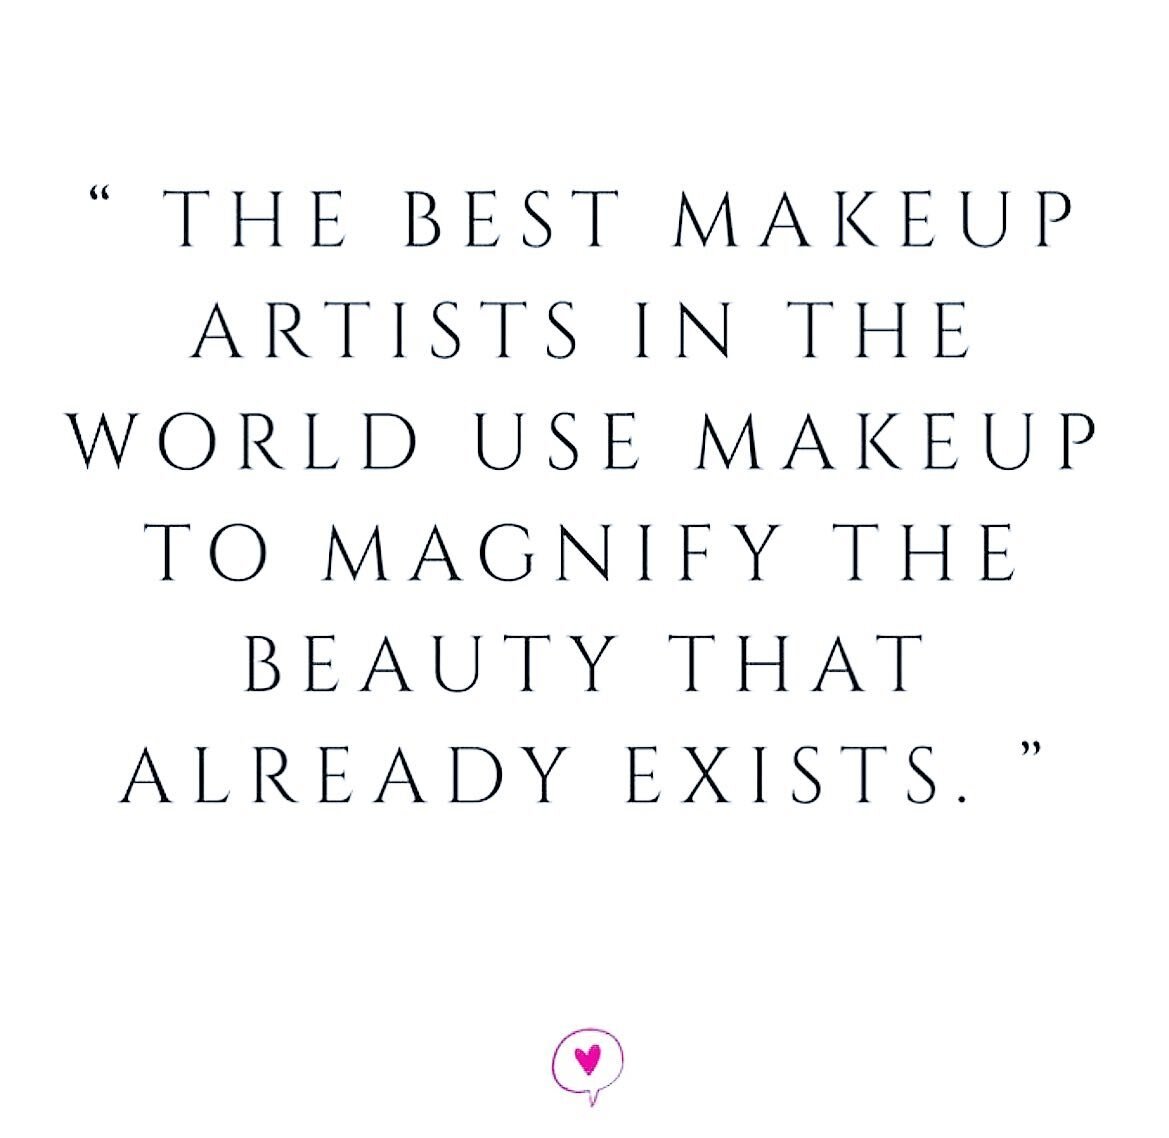 A makeup philosophy I&rsquo;ve always lived by whenever I&rsquo;m creating looks for bridals and special events 🌟👩🏻&zwj;🎨💋
.
.
.
.

#KElseArtistry #chicagobrides #chicagobridalmua #chitownmua #chicagomakeupartist #weddingseason #chicagoweddings 